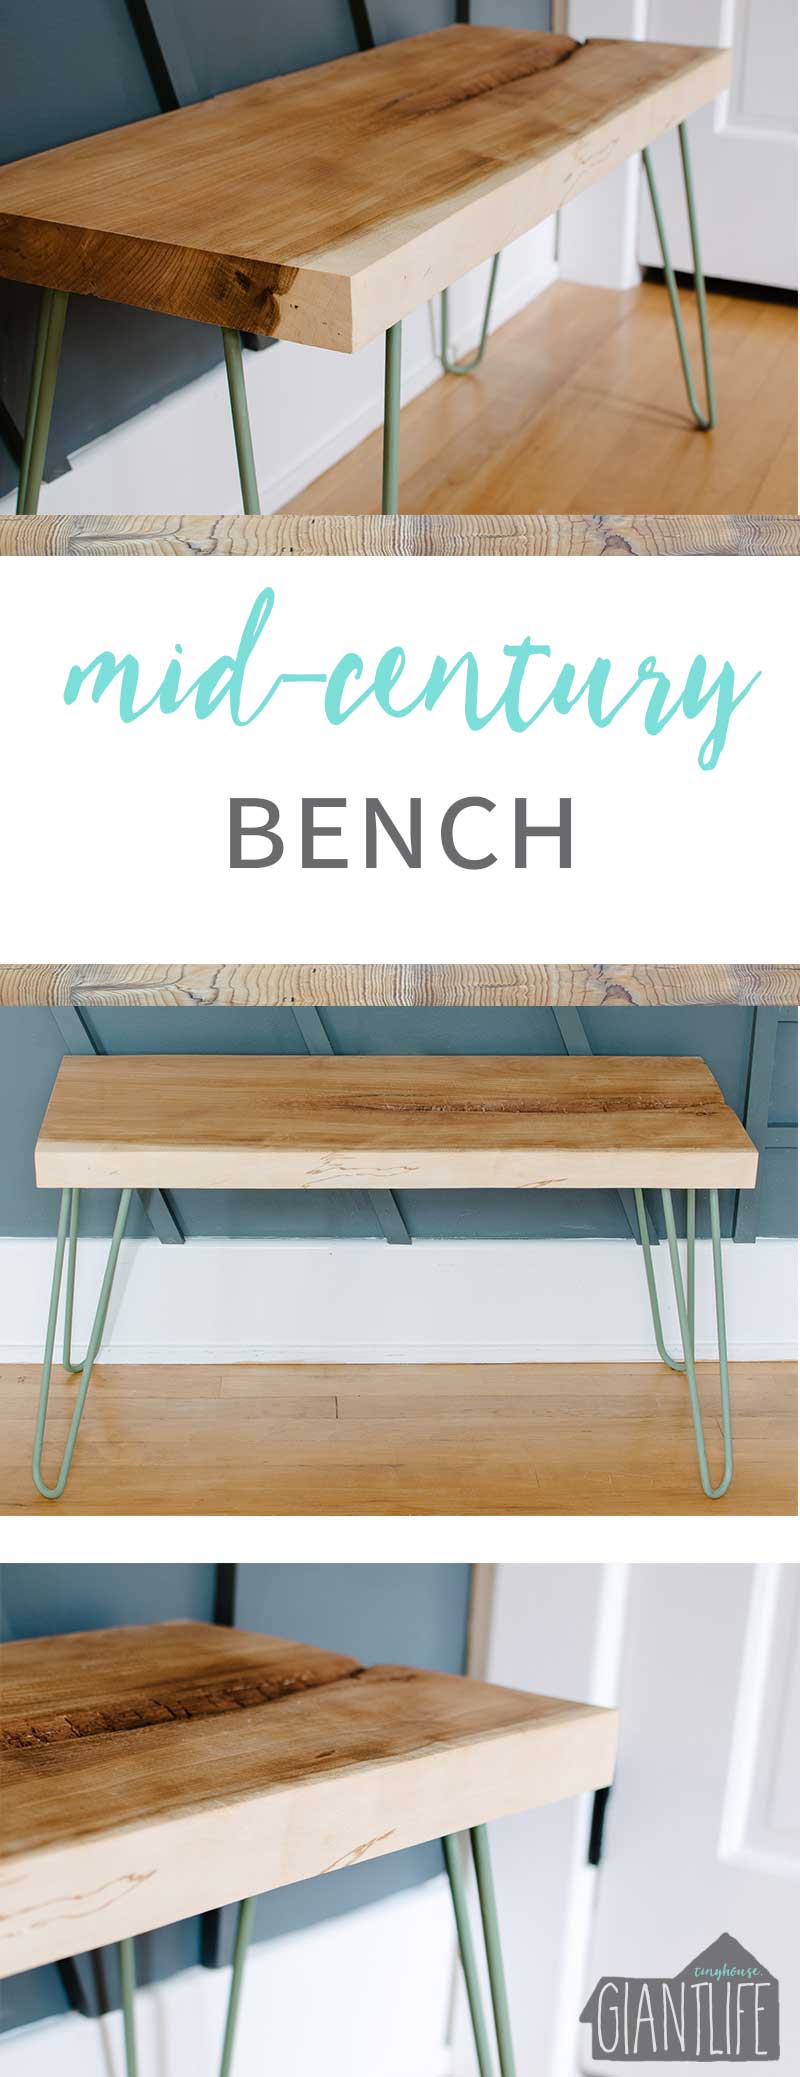 When The Design Plan Takes A Detour | Mid-Century Bench | One Room Challenge Week 4